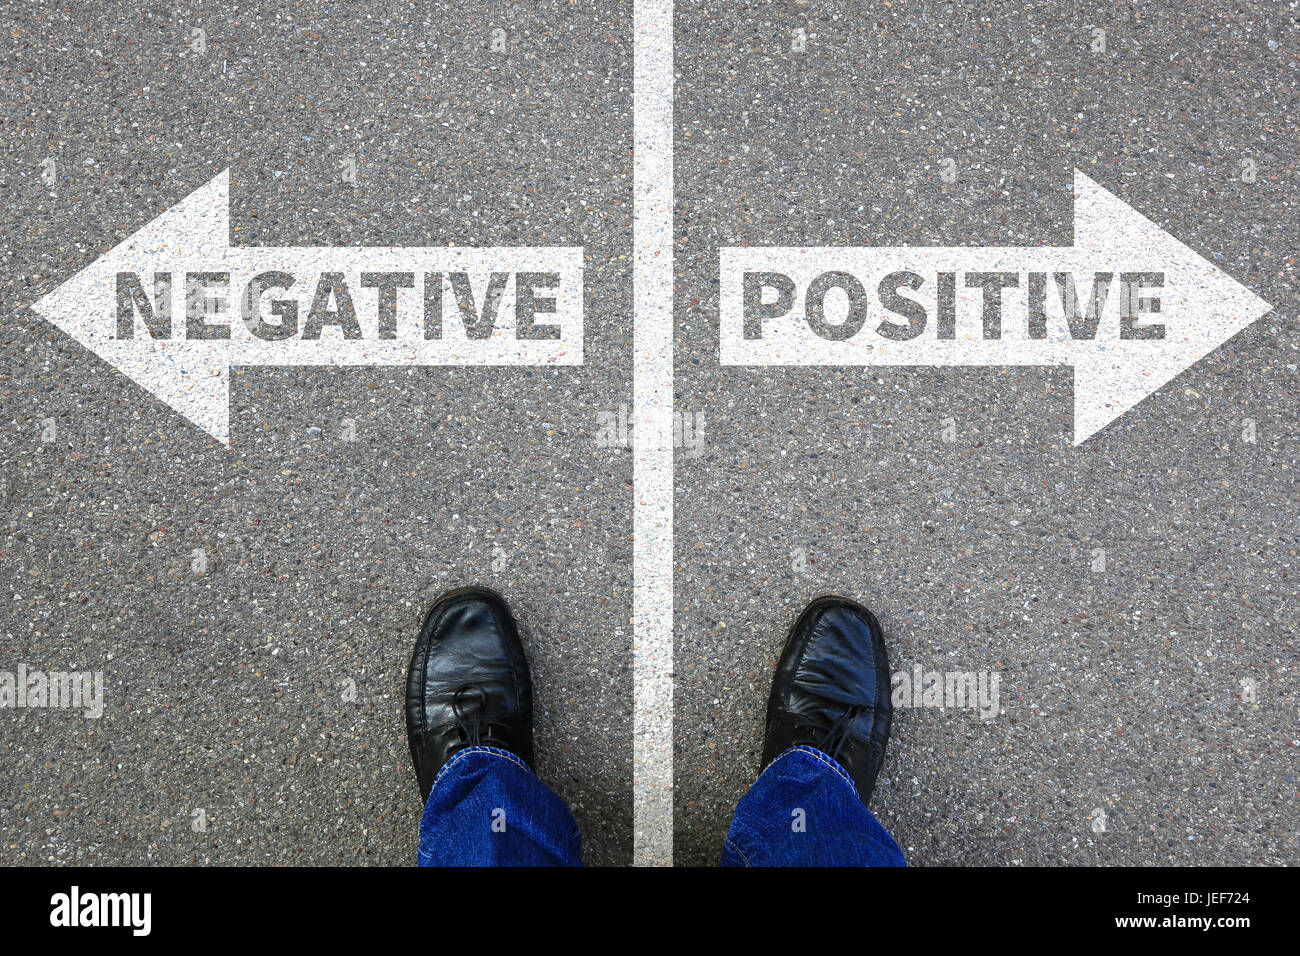 Negative positive thinking good bad thoughts attitude business concept solution decision decide choice Stock Photo